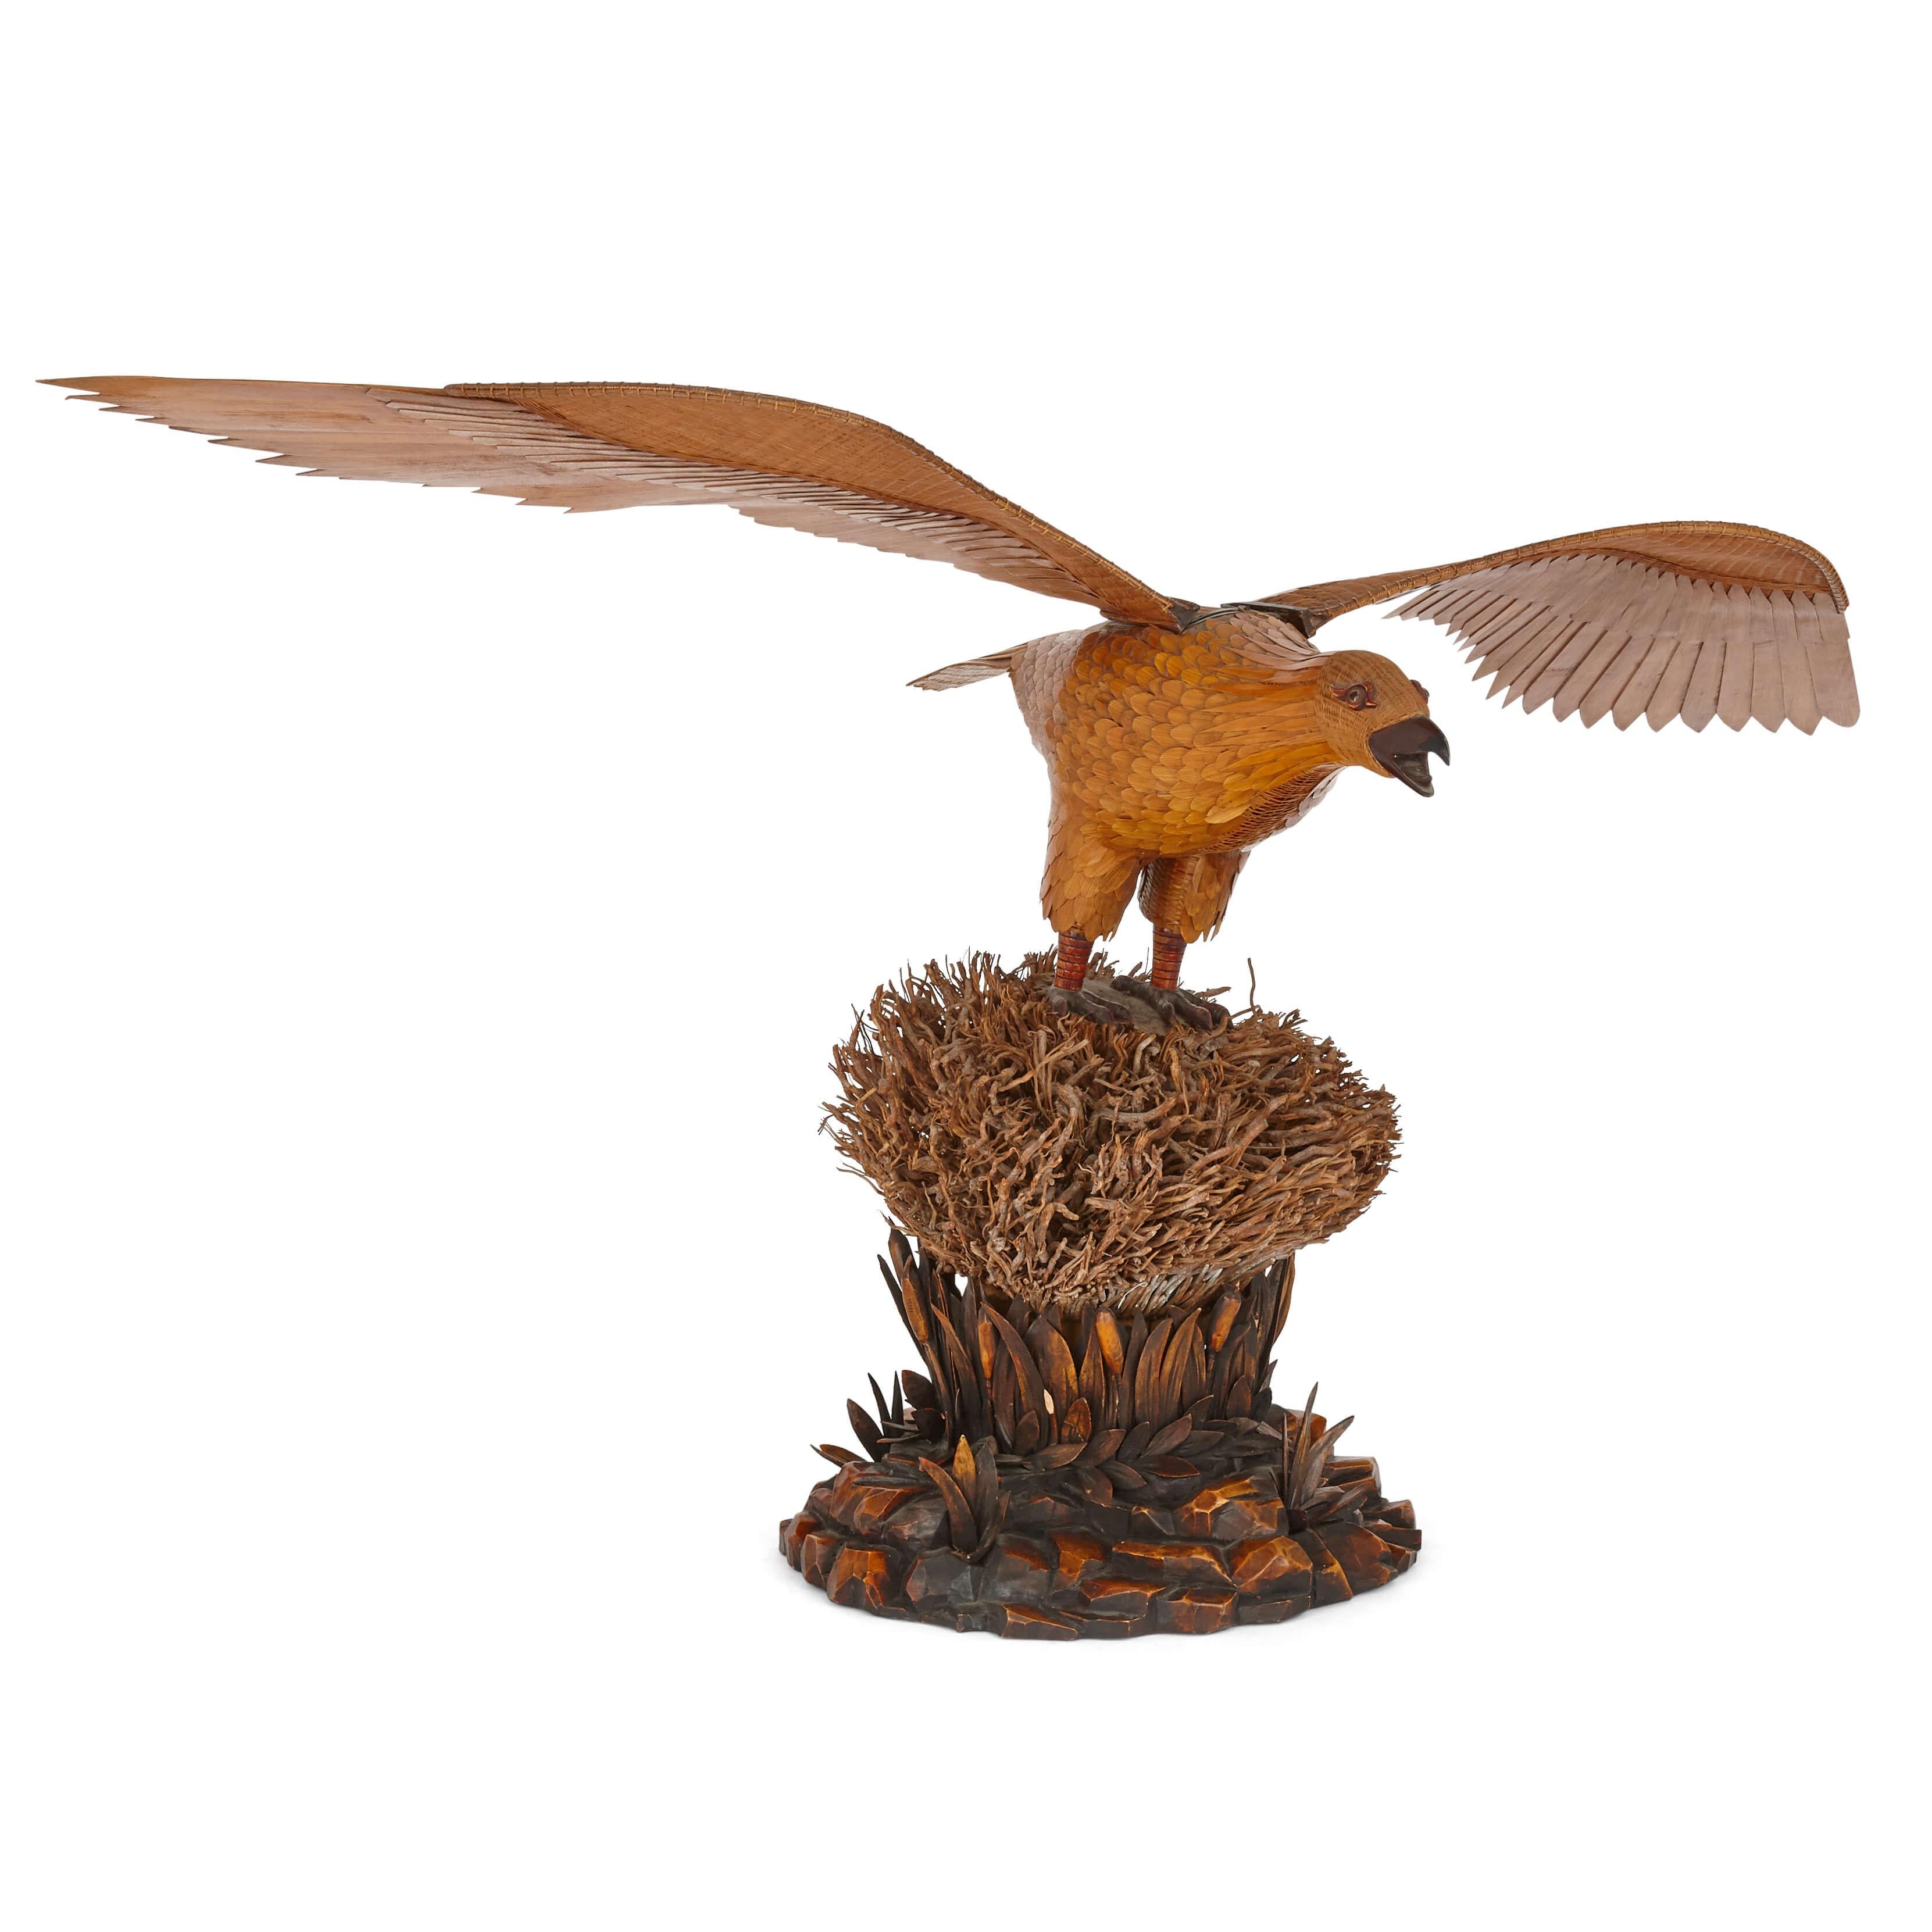 Large and unusual Chinese bamboo and wood eagle sculpture
Chinese, 20th century
Dimensions: Height 64cm, width 116cm, depth 57cm

This large Chinese bamboo and wood sculpture, depicts an eagle with its wings outstretched. The feathers have been